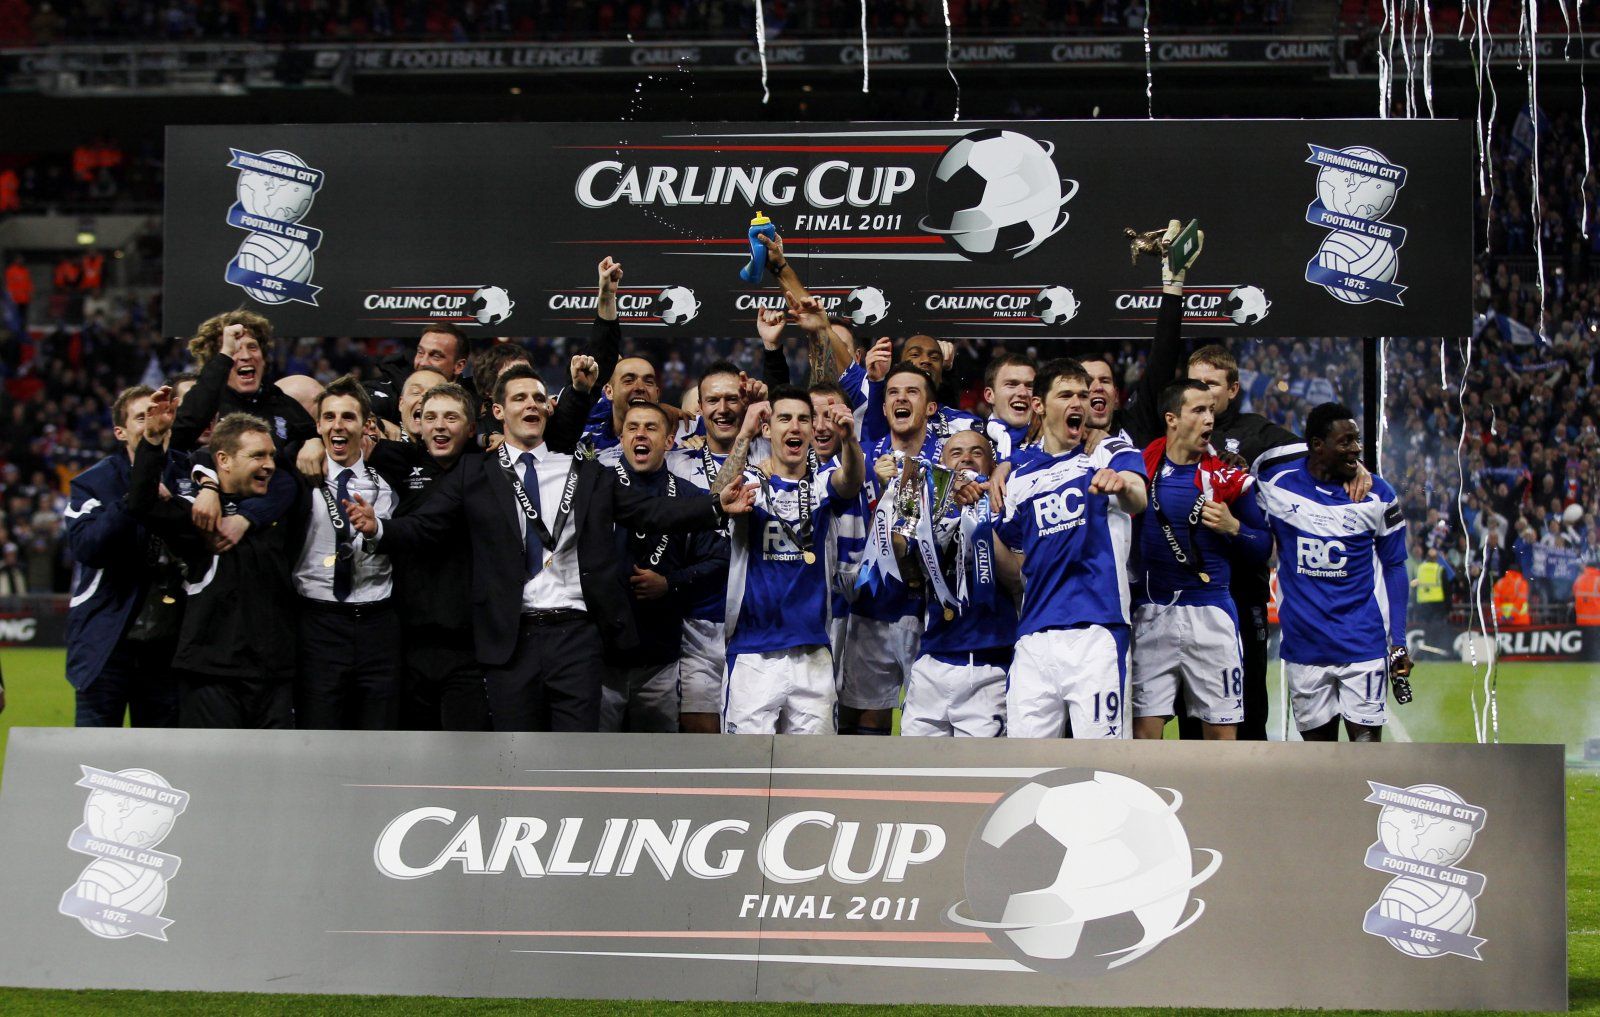 Final 2011. Carling Cup. Leagues Cup. Hkp9a (FC). City Team 640043.